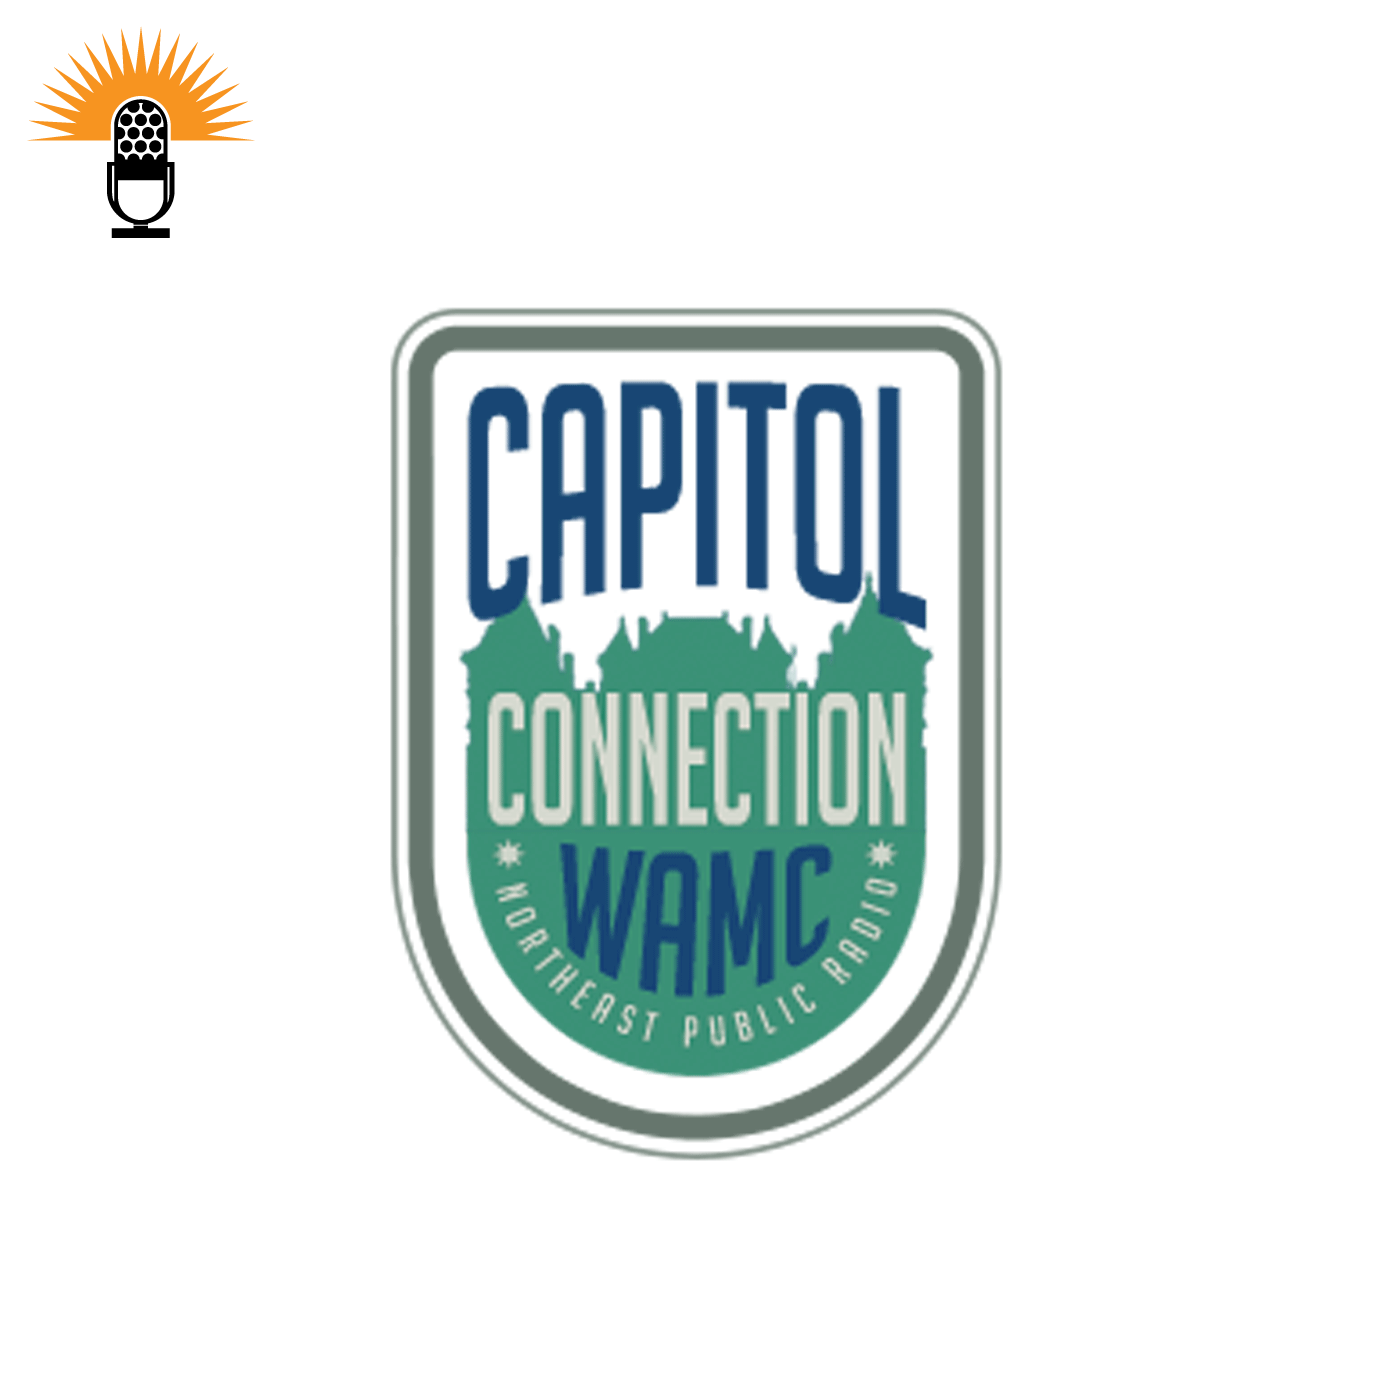 The Capitol Connection - Blair Horner, Executive Director of NYPIRG